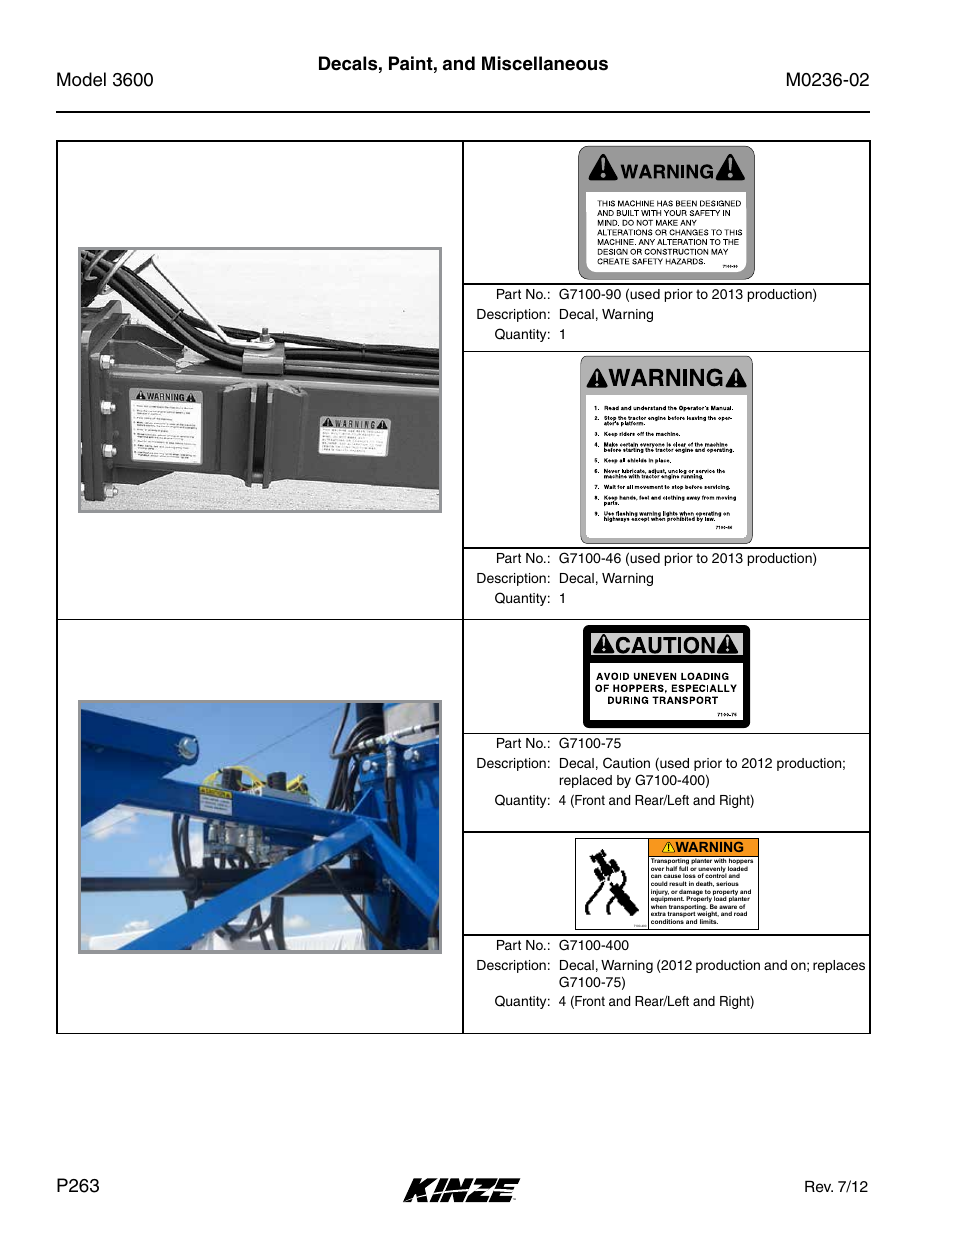 Decals, paint, and miscellaneous | Kinze 3600 Lift and Rotate Planter Rev. 5/14 User Manual | Page 266 / 302